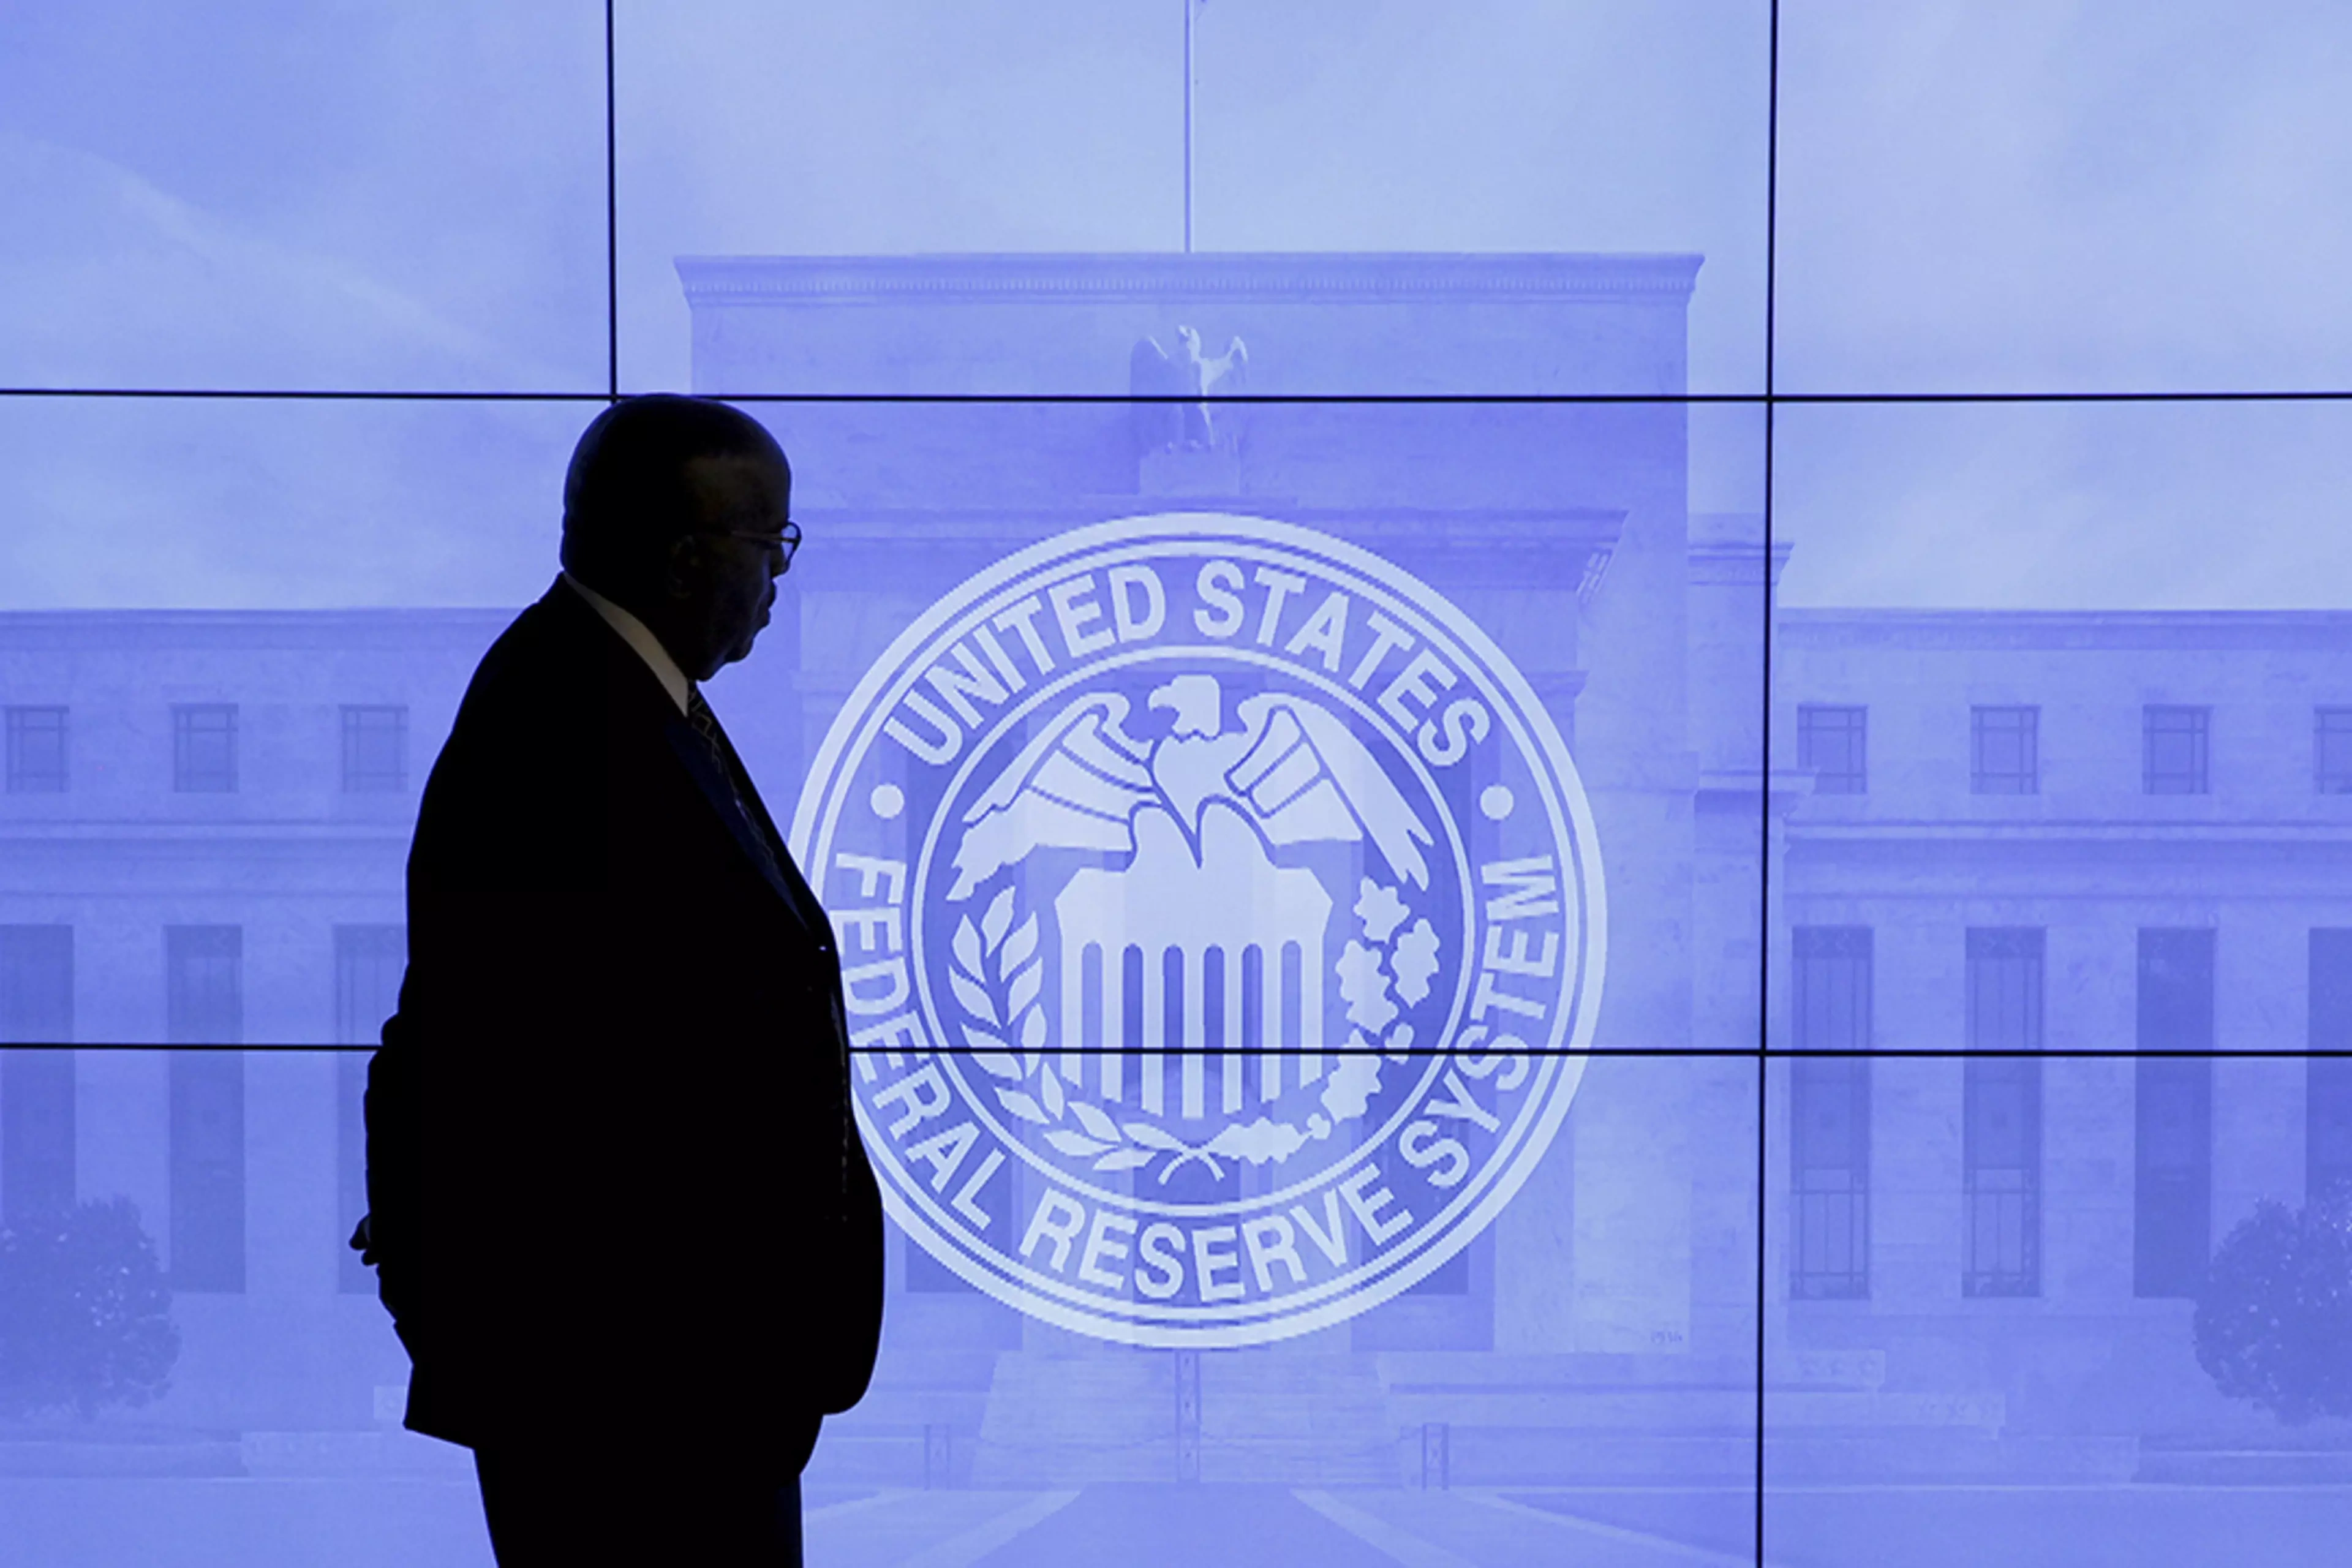 A security guard walks by an image of the Federal Reserve.